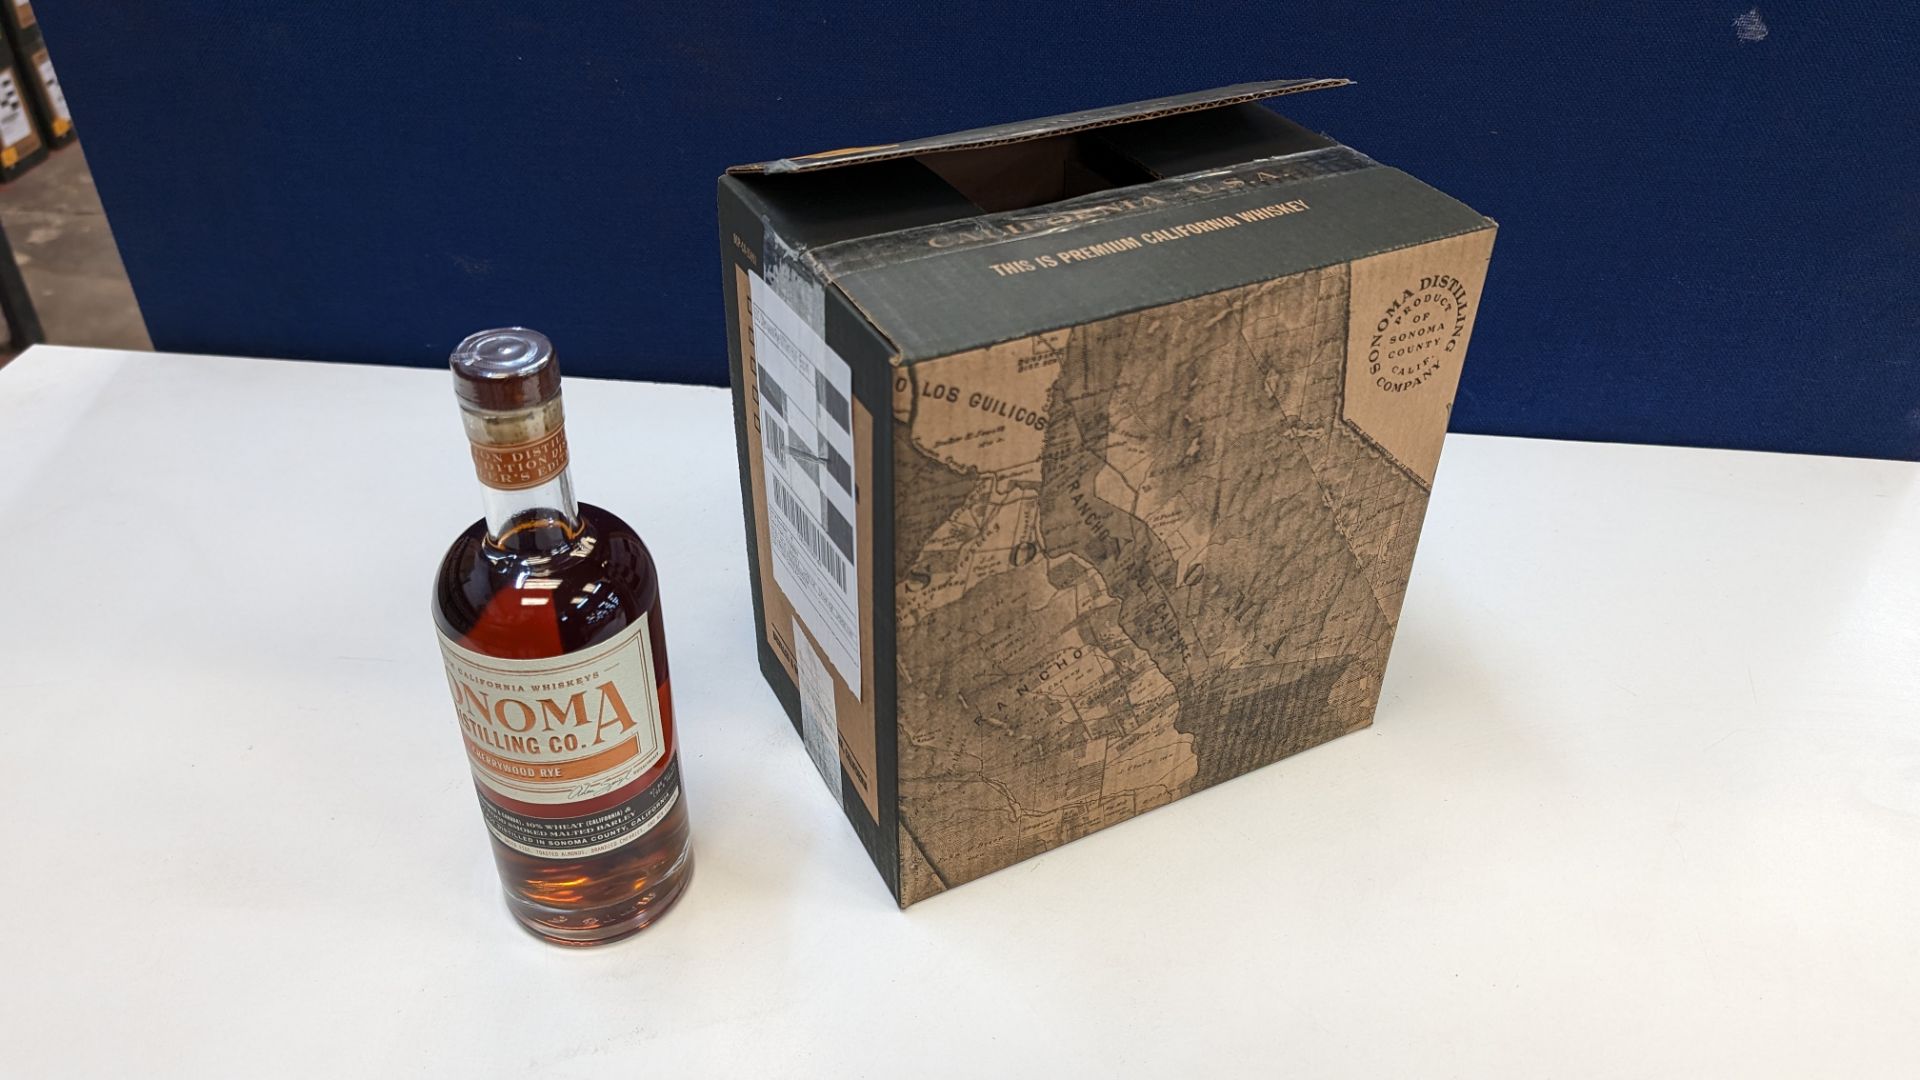 6 off 700ml bottles of Sonoma Cherrywood Rye Whiskey. In Sonoma branded box which includes bottling - Image 5 of 7